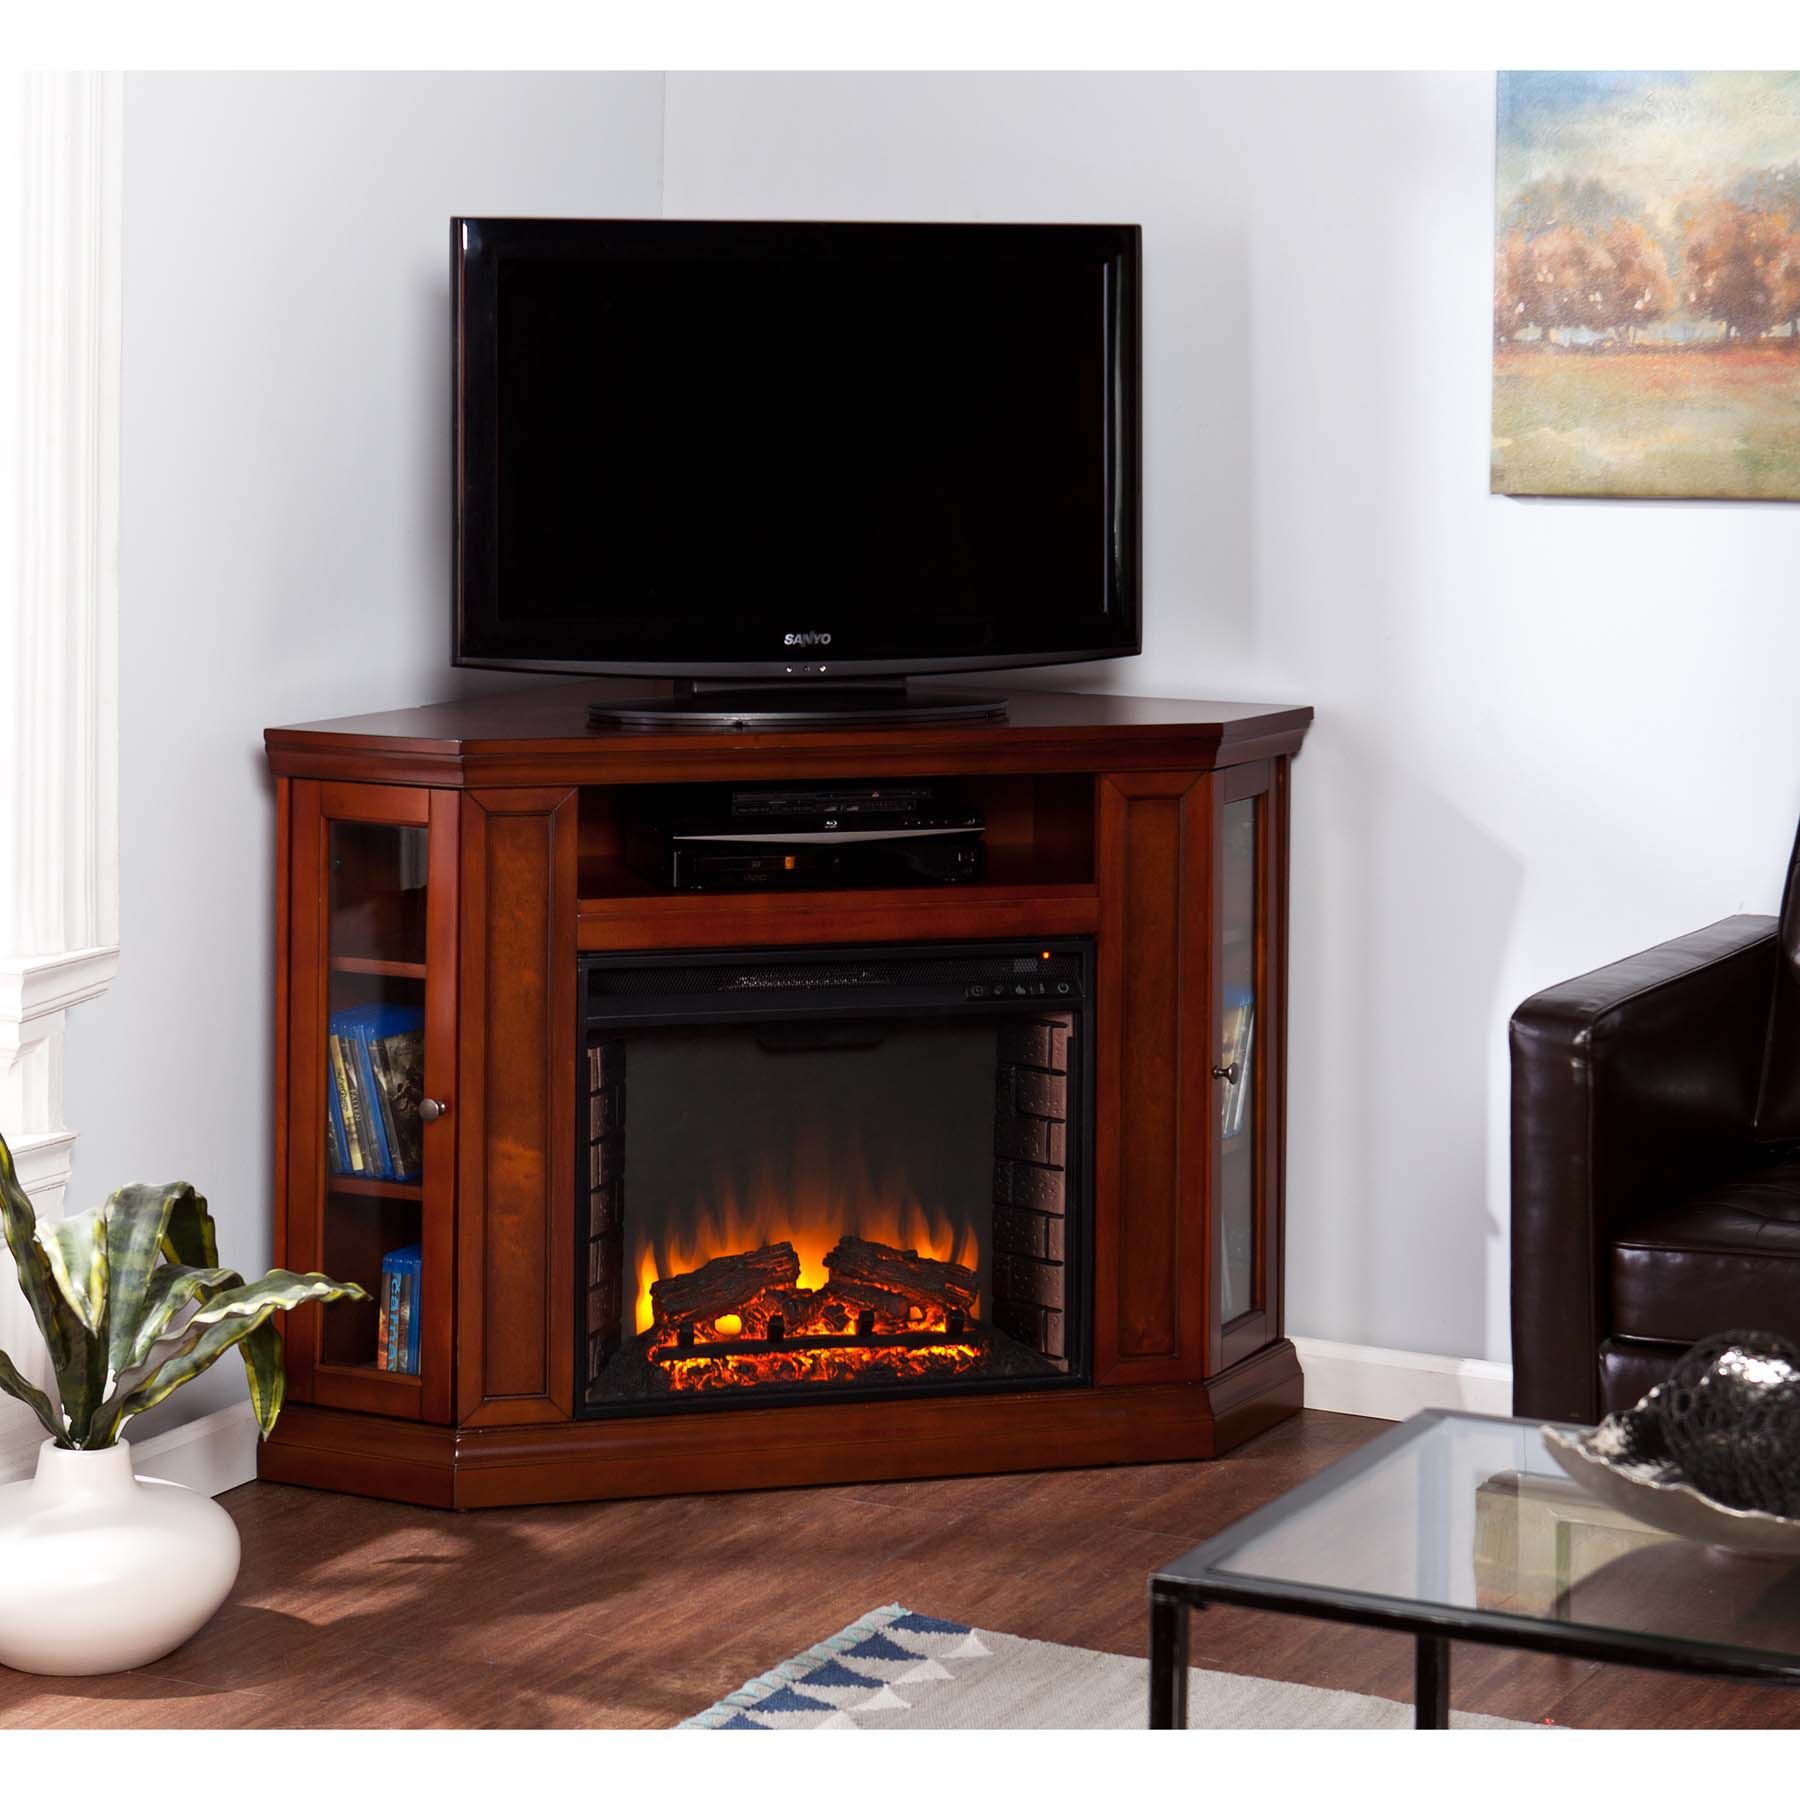 Fireplace Tv Stand Lowes Awesome 42 Best Rustic Fireplace Images